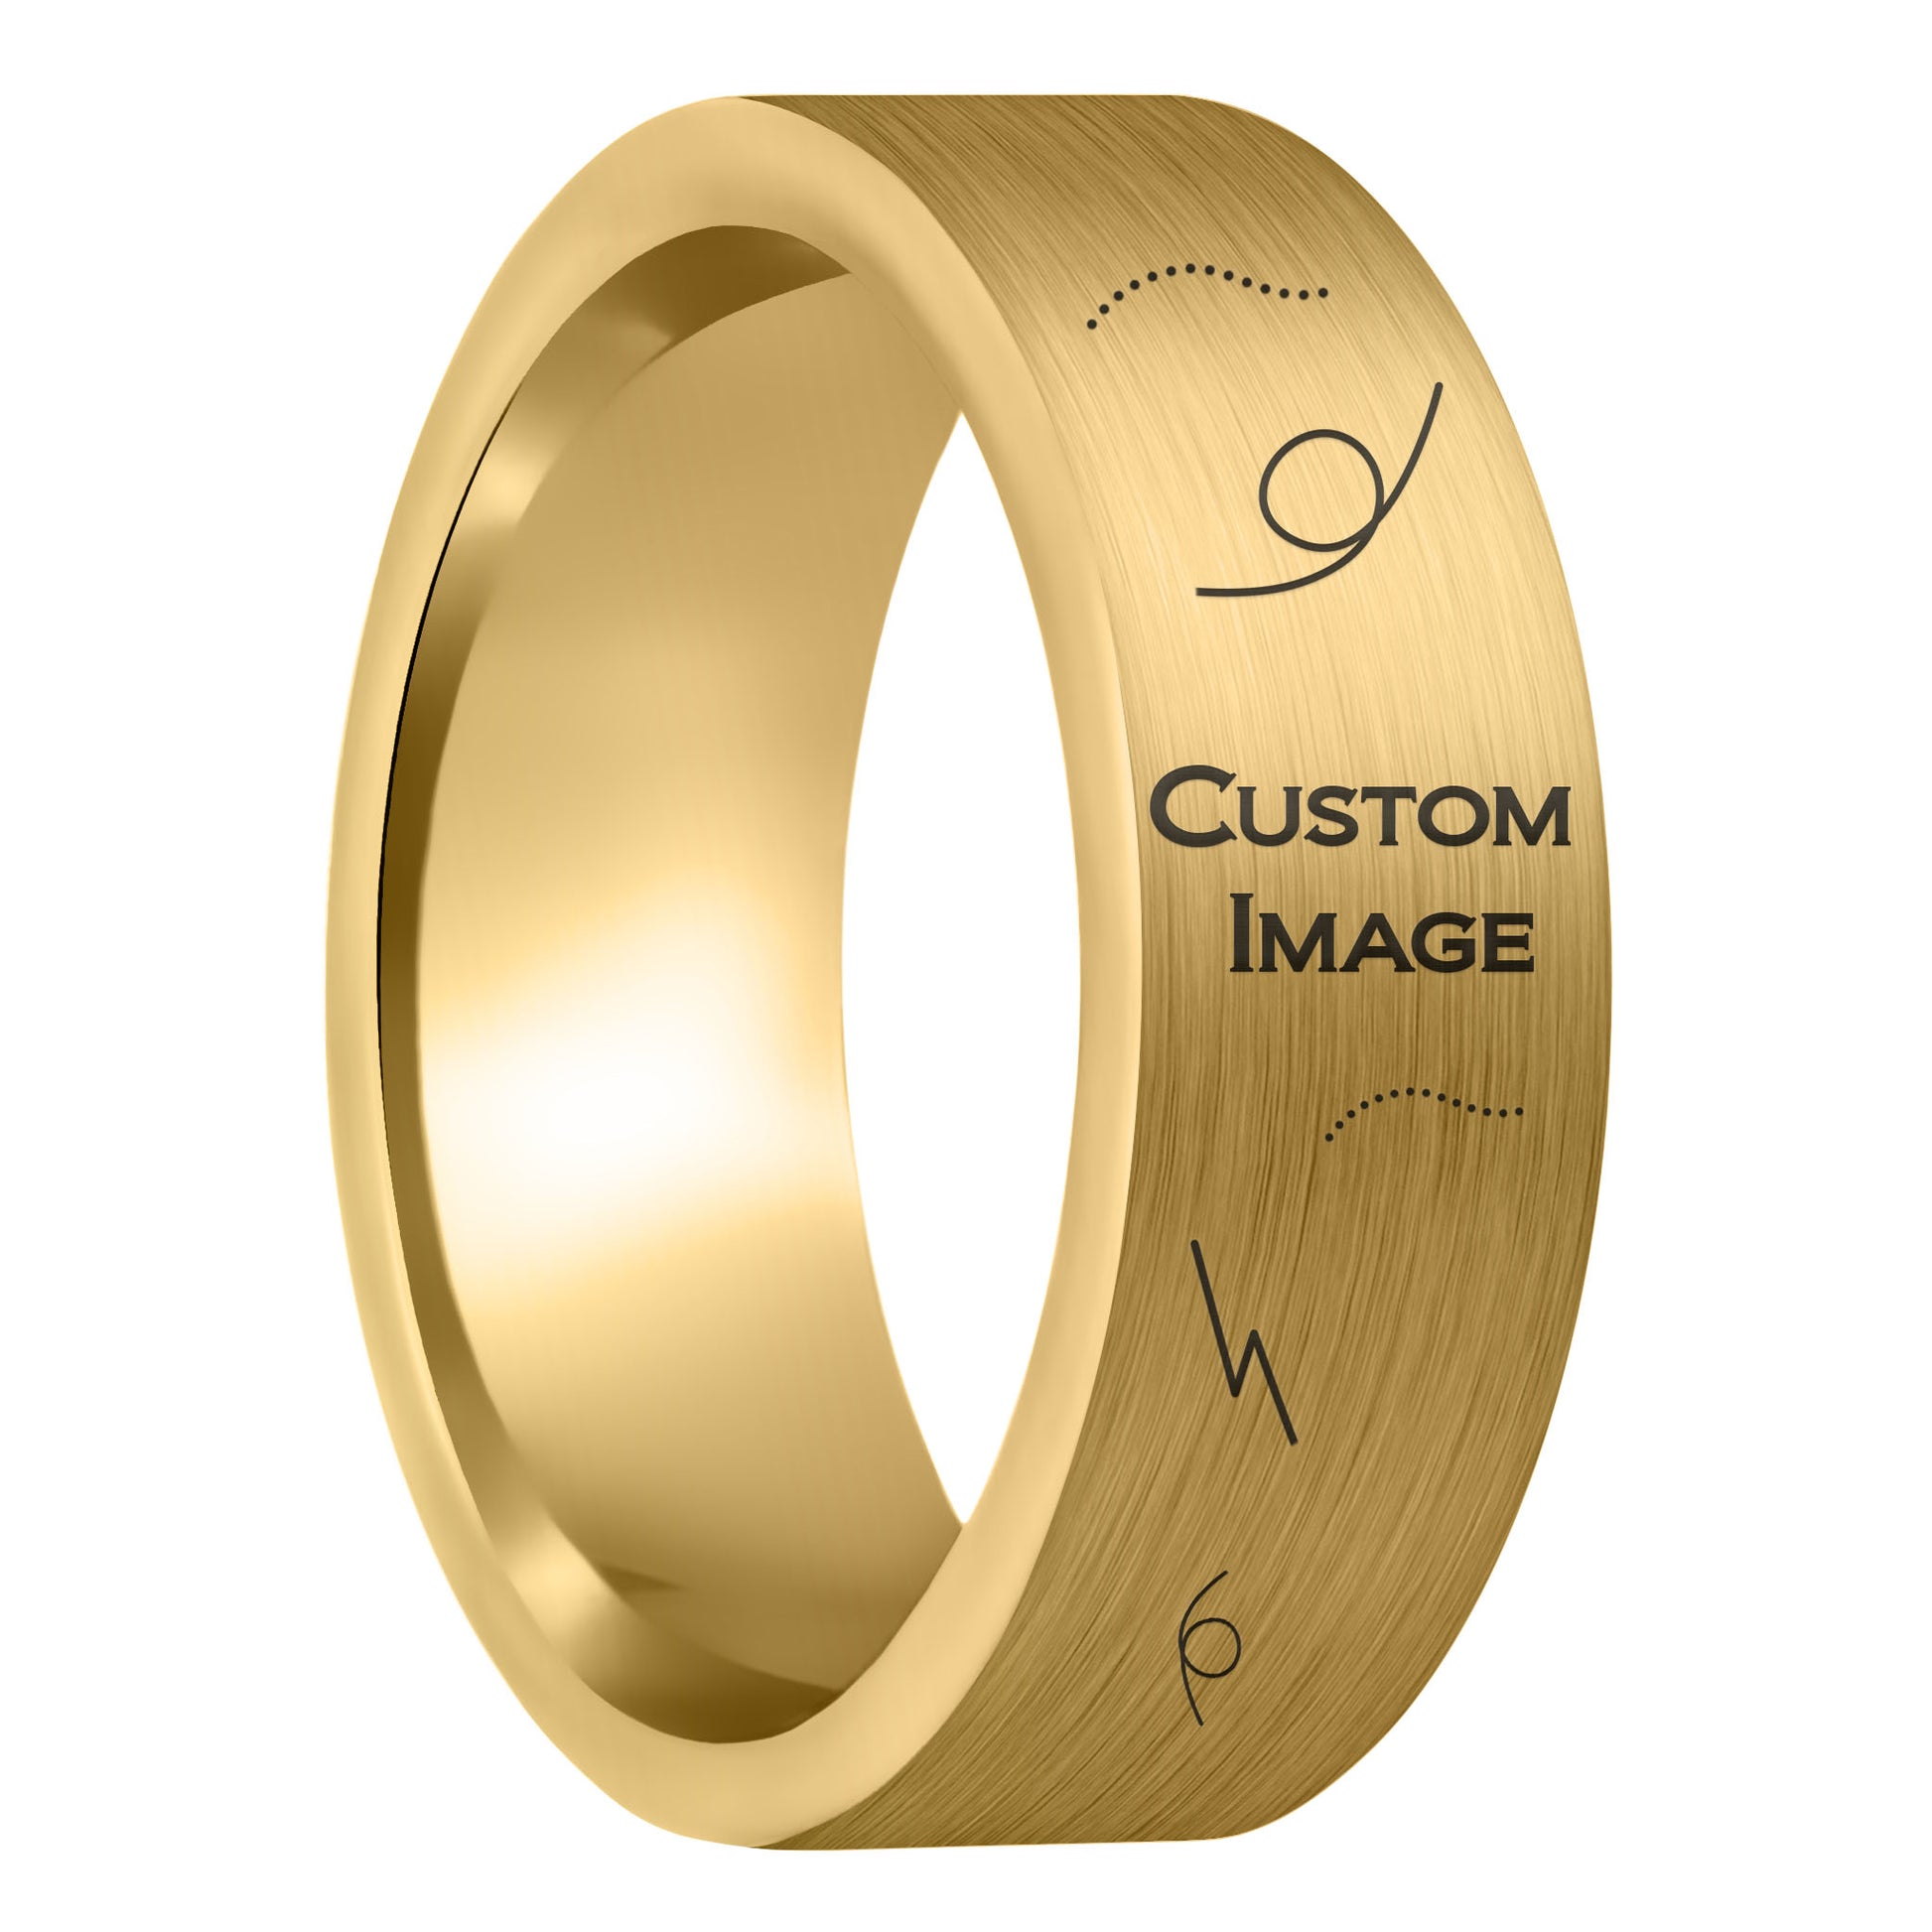 A custom image engraved brushed gold tungsten men's wedding band displayed on a plain white background.